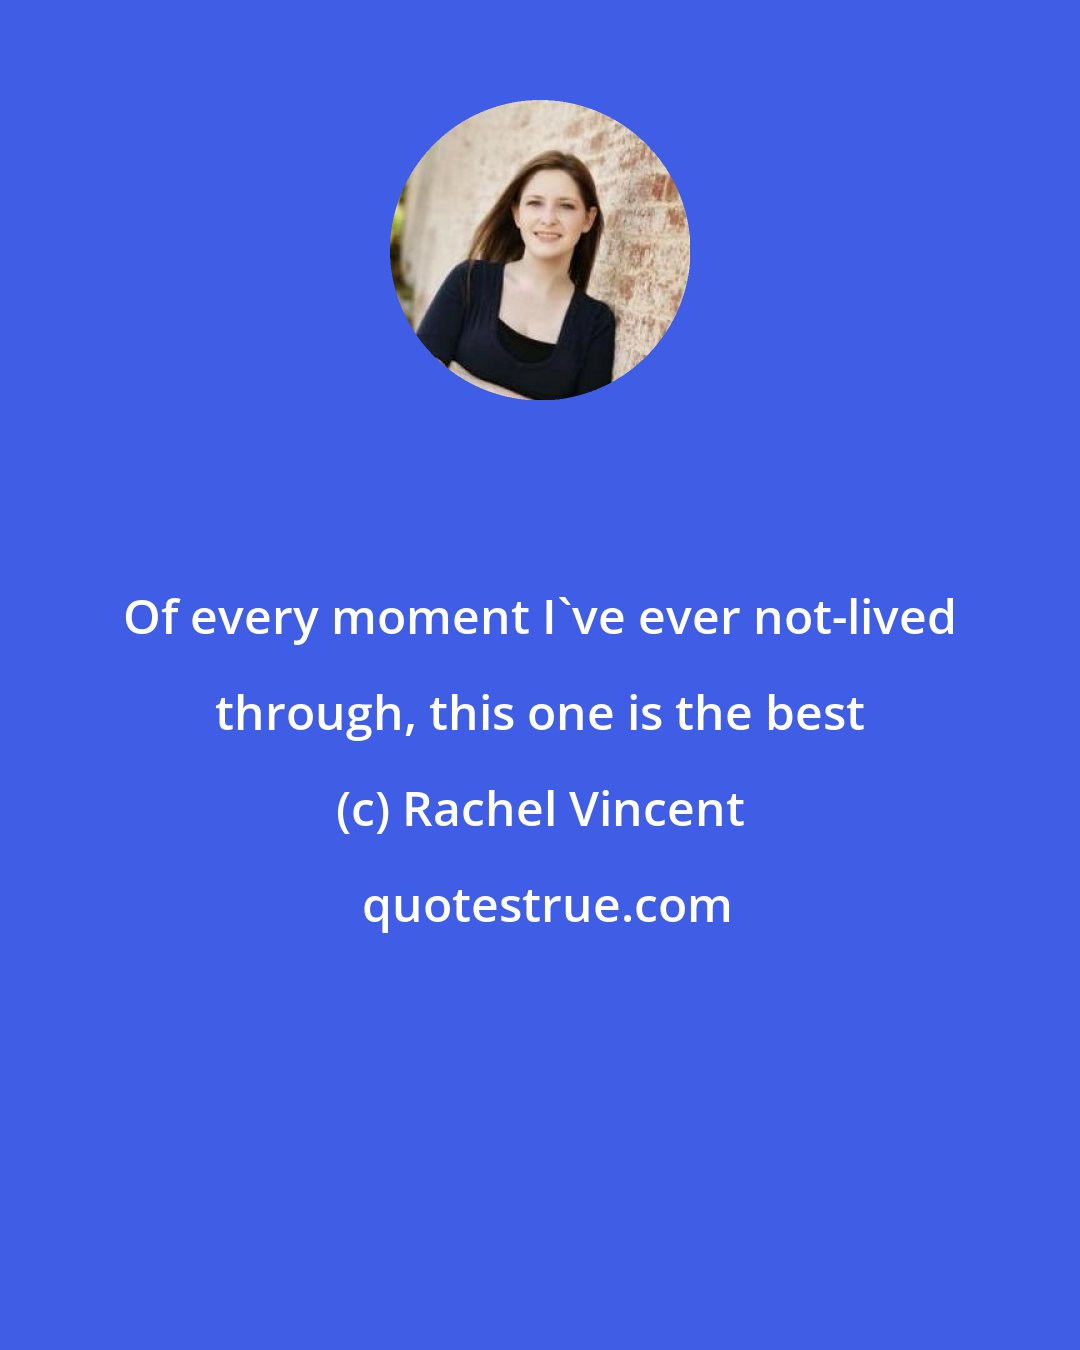 Rachel Vincent: Of every moment I've ever not-lived through, this one is the best